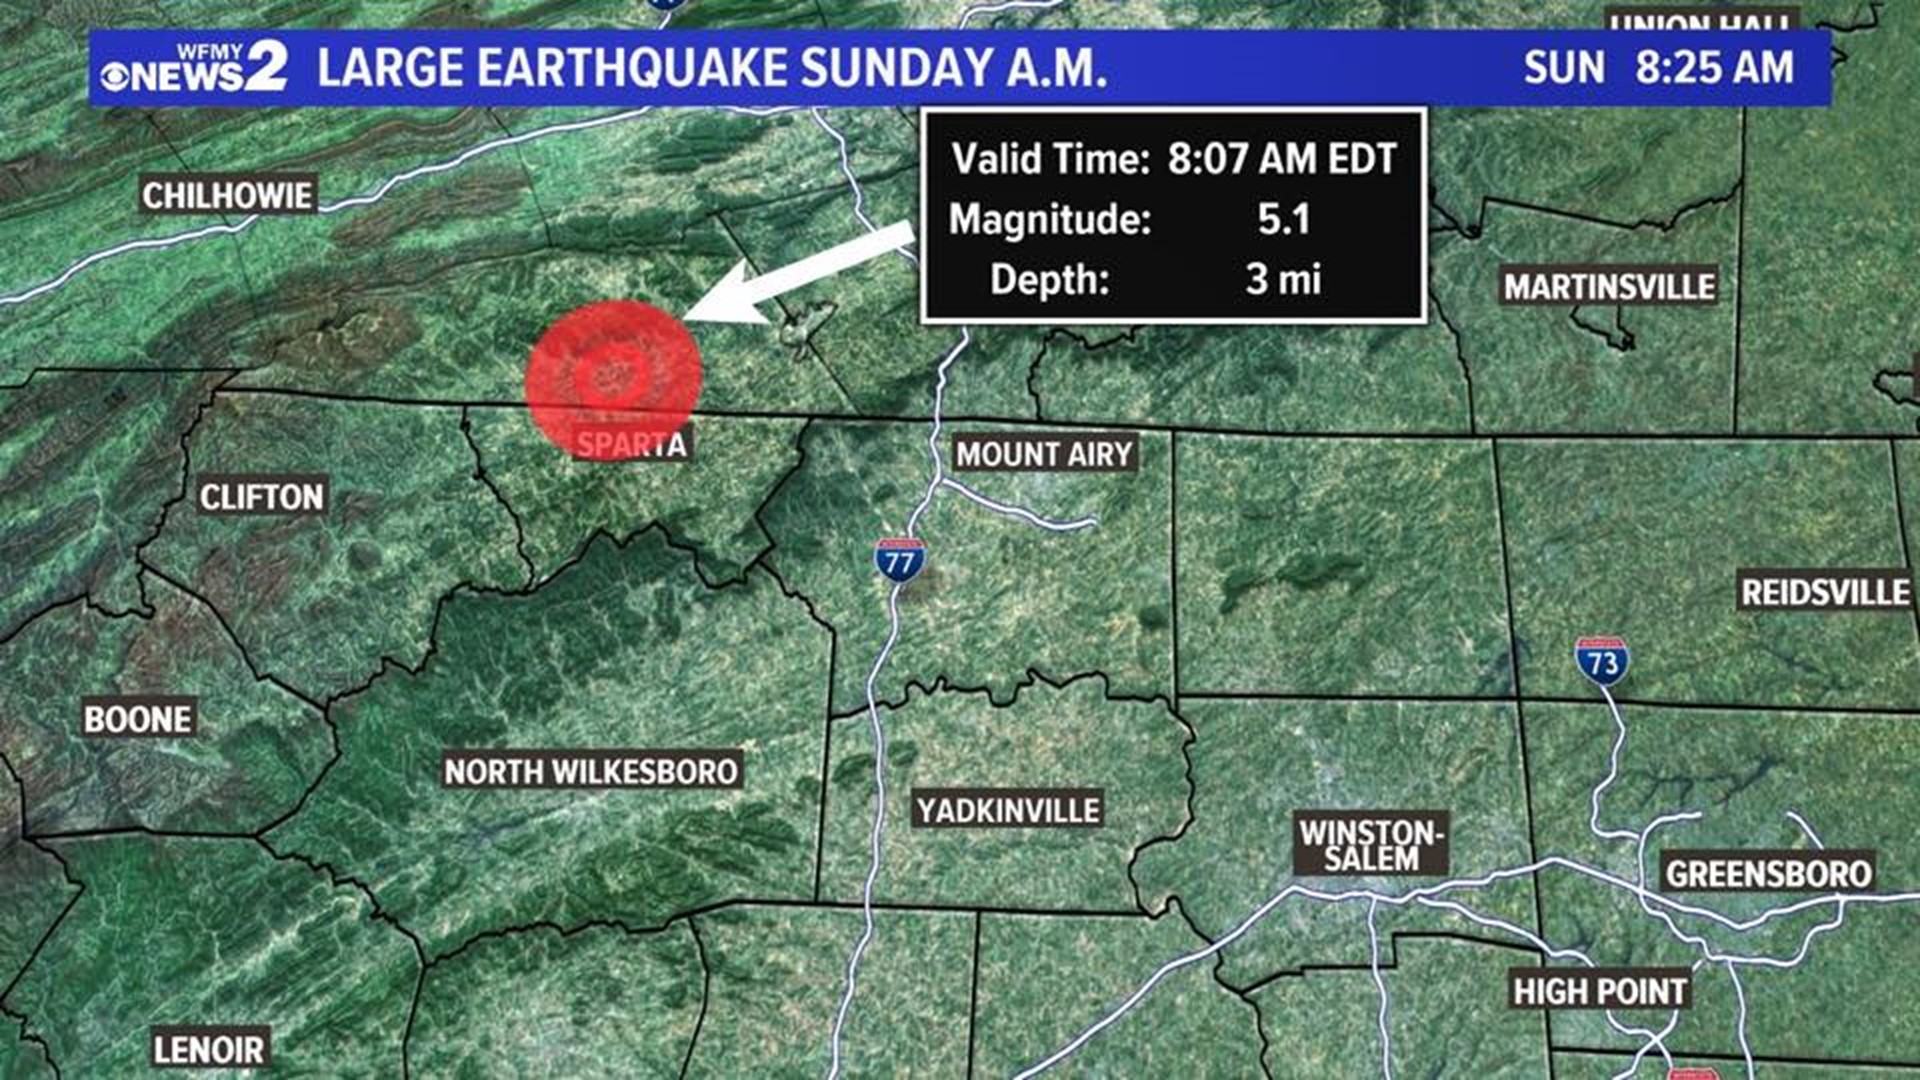 A large earthquake hit the North Carolina mountains Sunday morning. Here's what we know now.